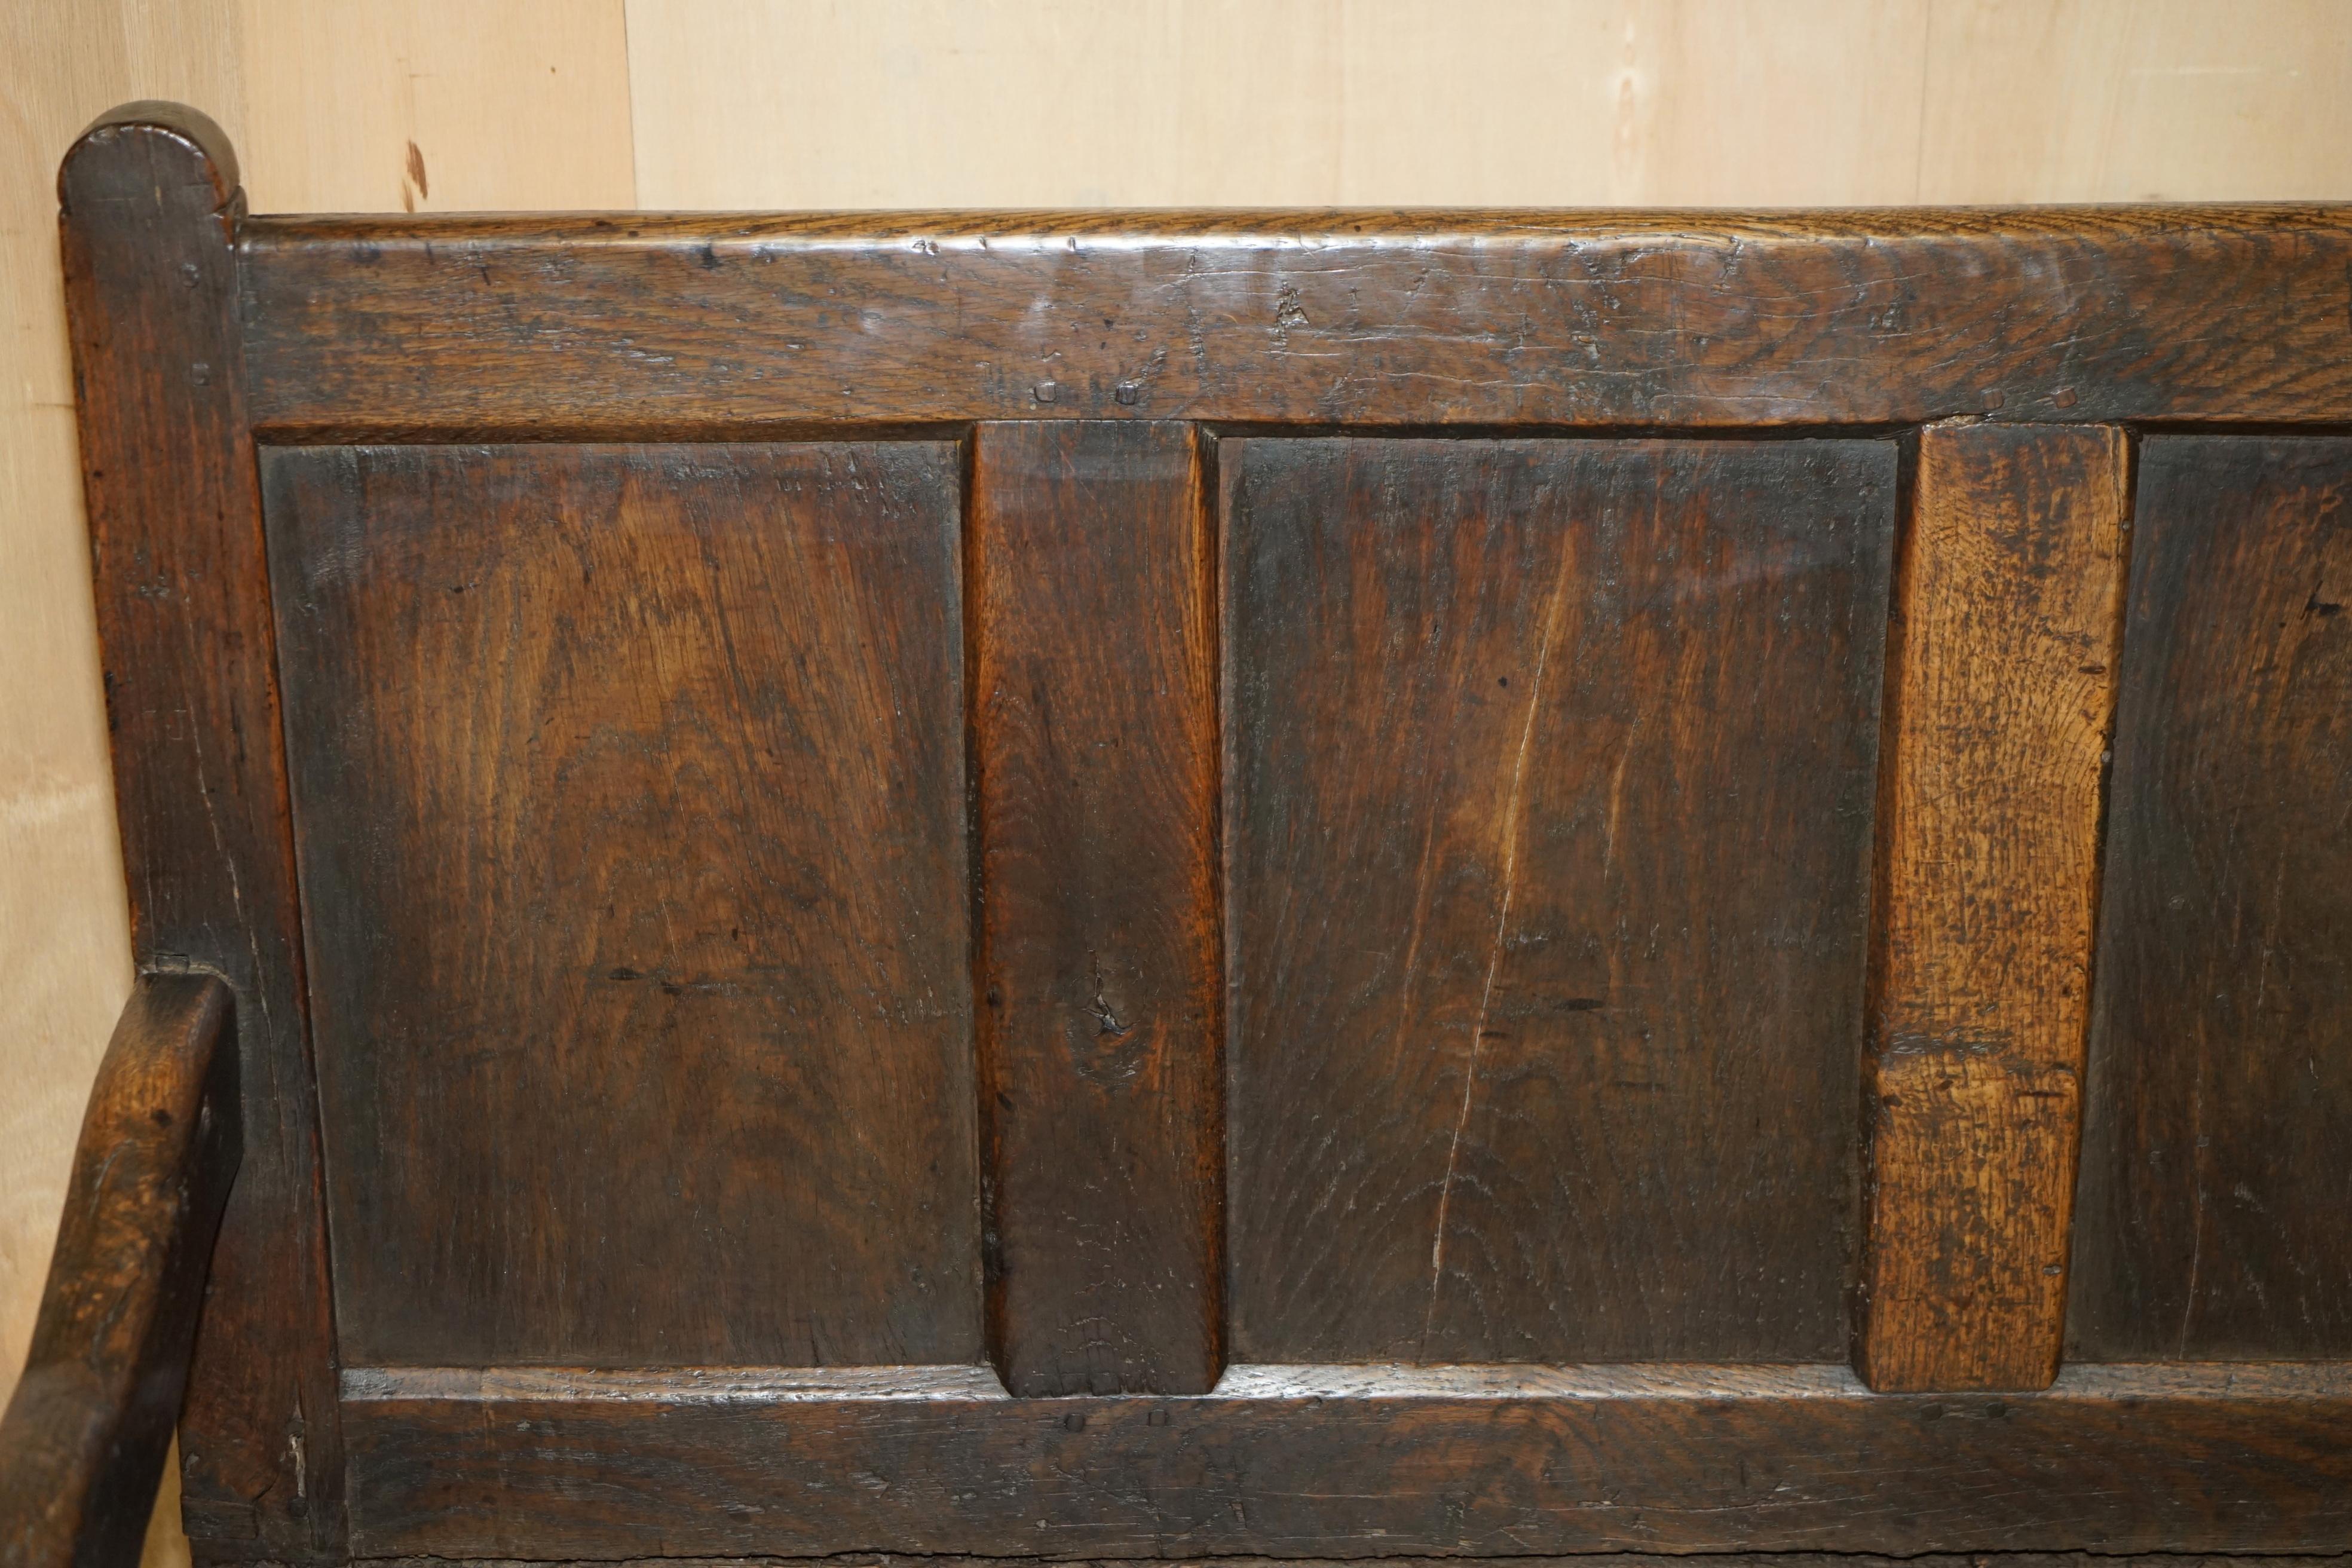 STUNNiNG 17TH CENTURY ANGLESEY WALES SETTLE BENCH LOVELY HALLWAY TAVERN SEATING im Angebot 3